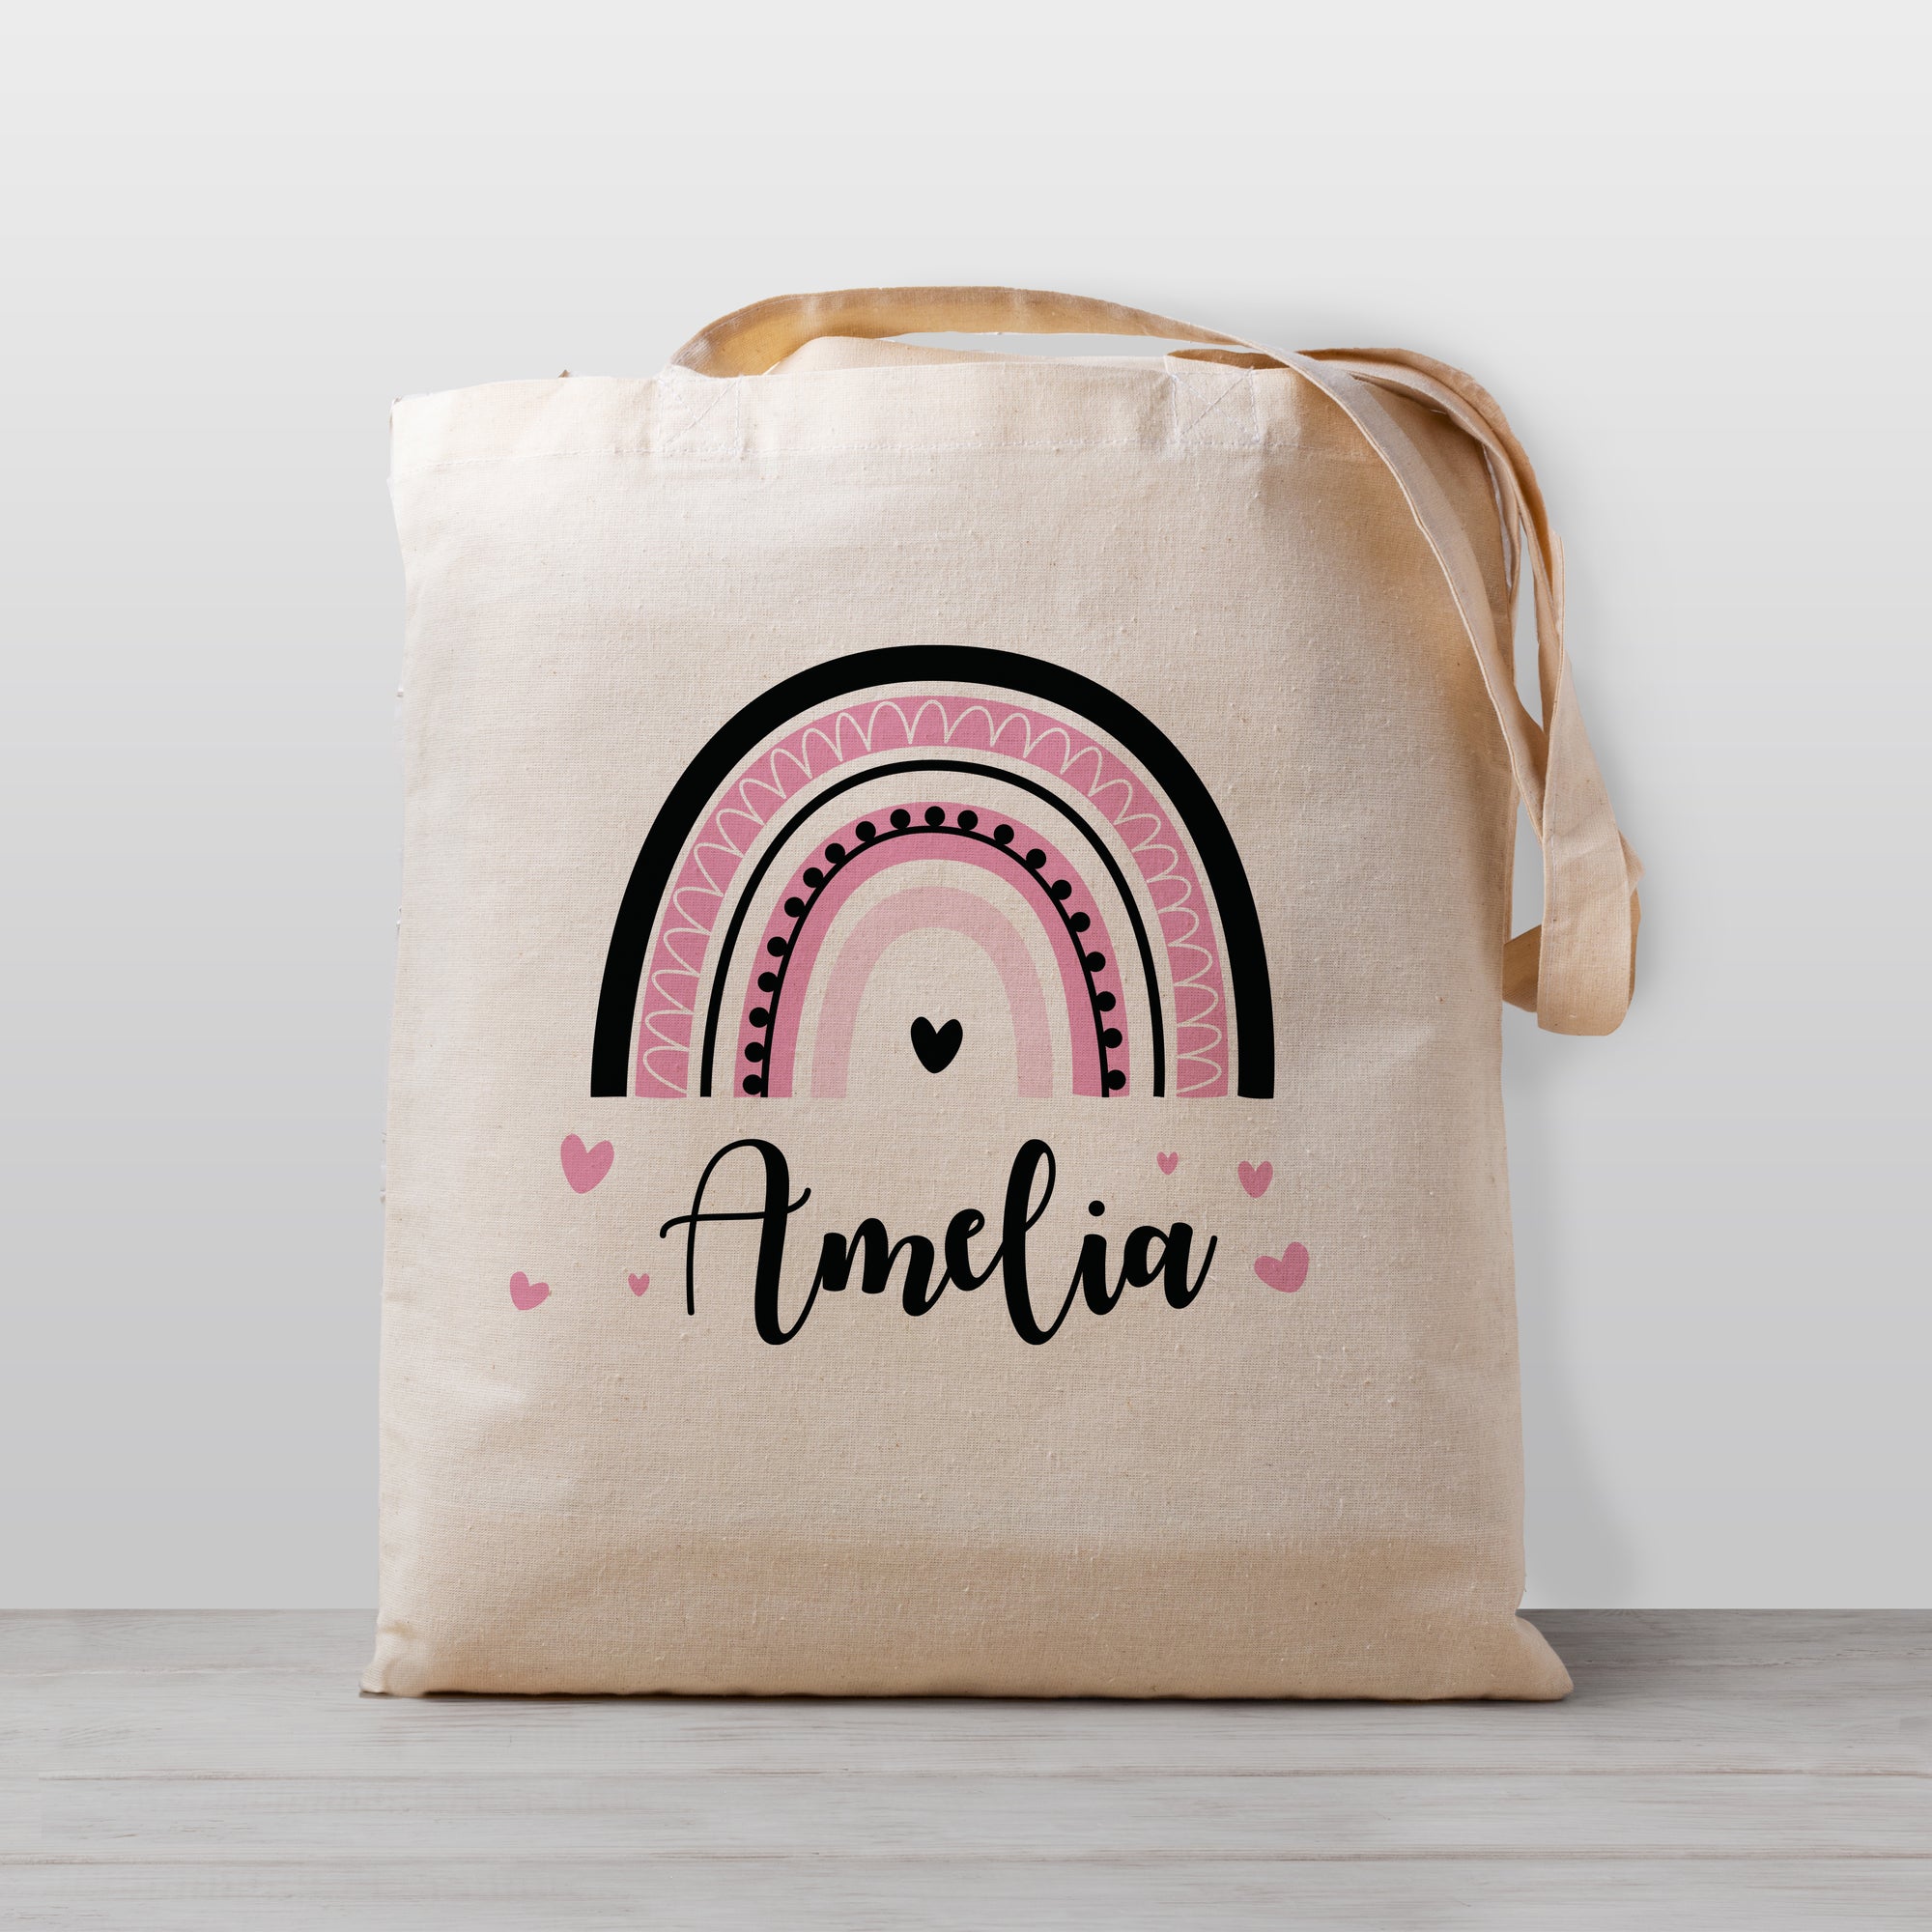 Personalized kid tote bag, with a pink and black rainbow. Totes are lightweight and easy for your child to carry to daycare, preschool, or even a trip to Grandma's house